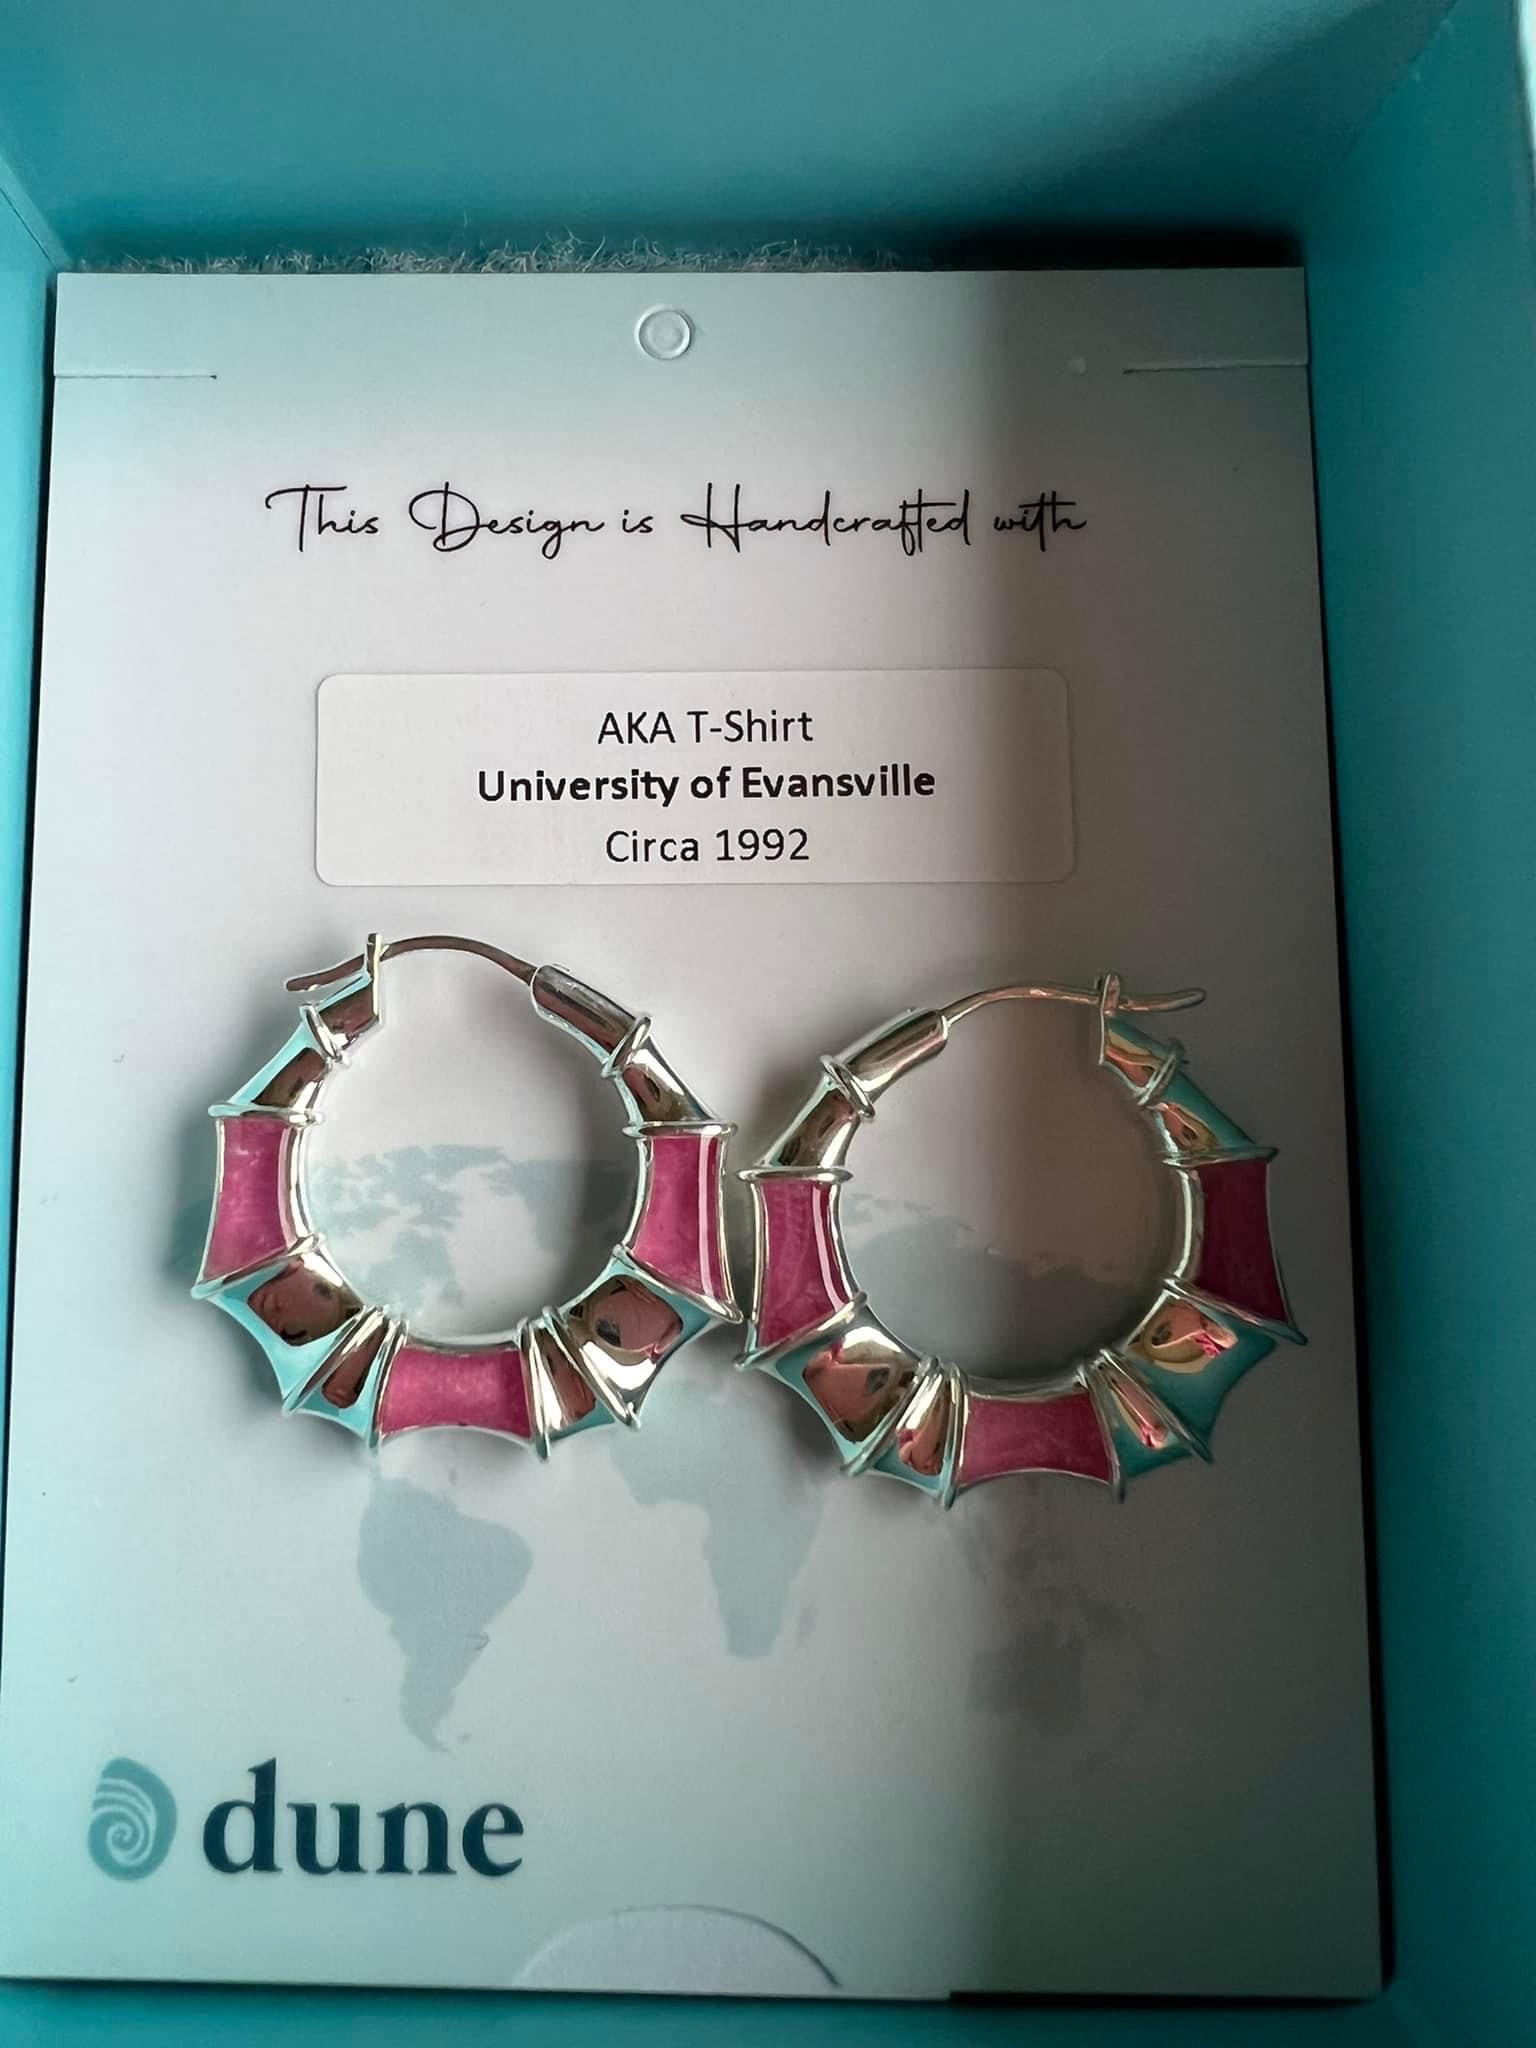 Circular pink and silver hoop earrings from Dune Jewelry lying in box.